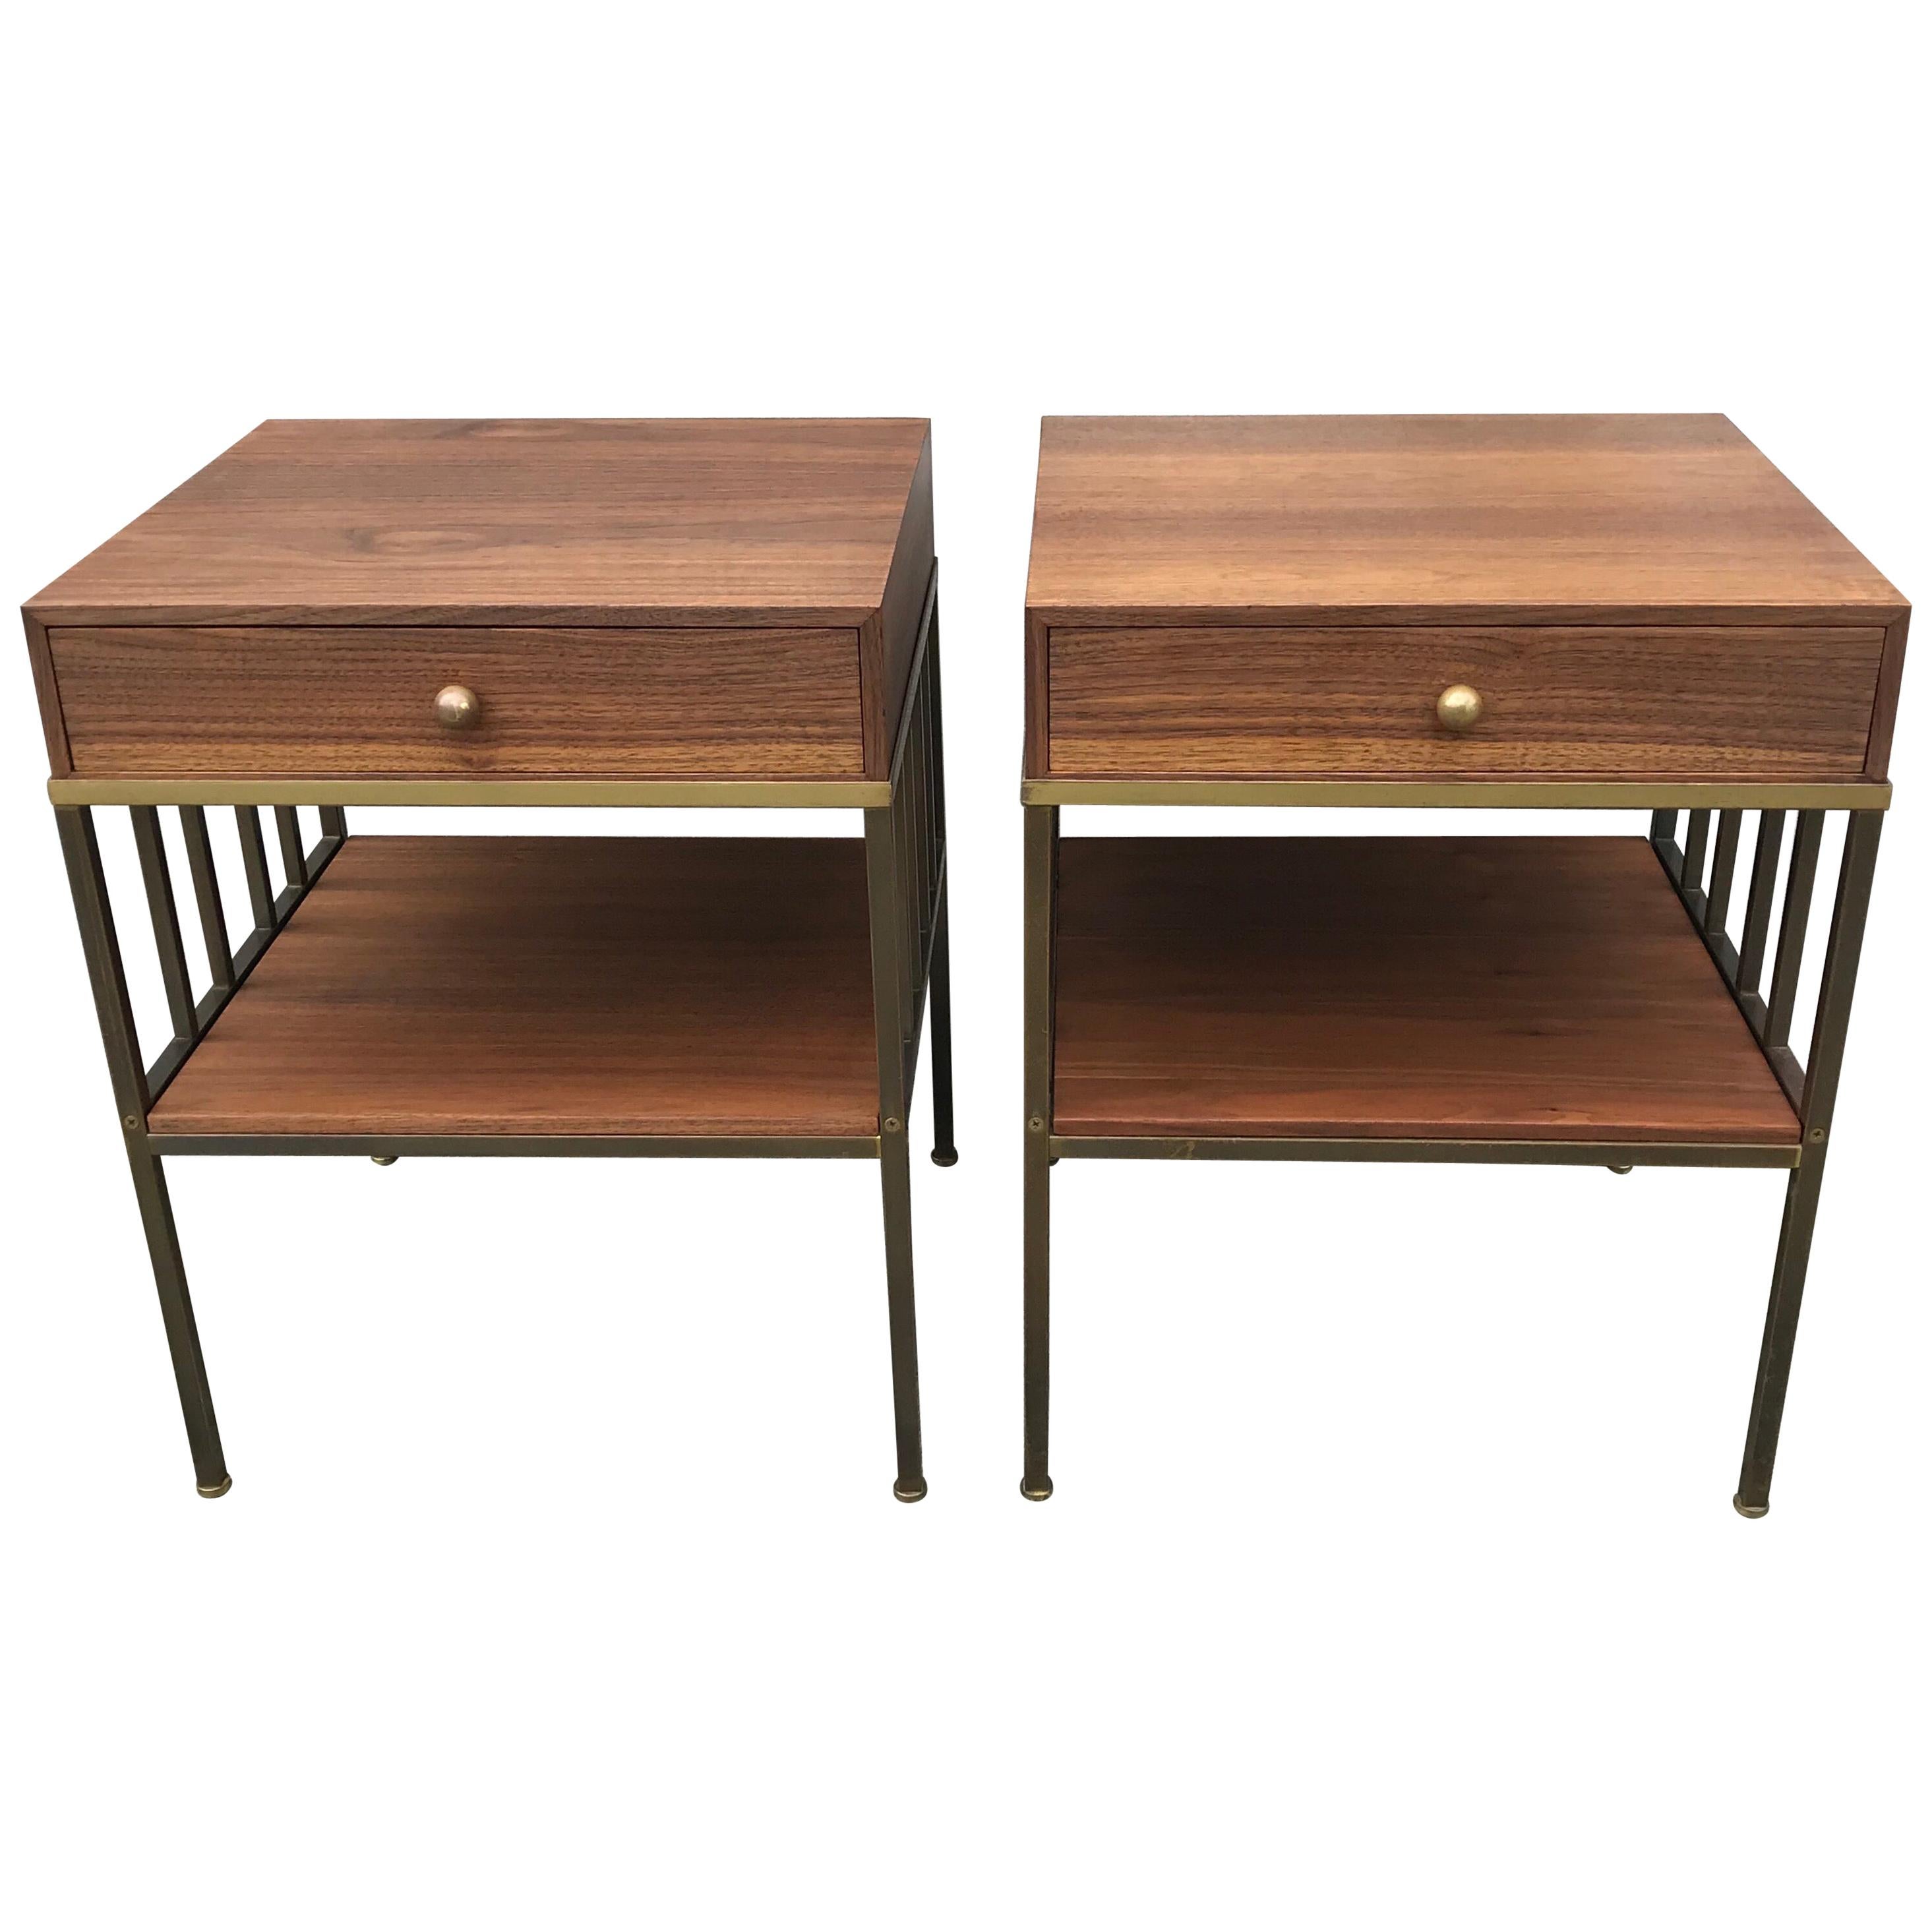 Pair of Mid Century Modern Side Tables or Nightstands by Paul McCobb